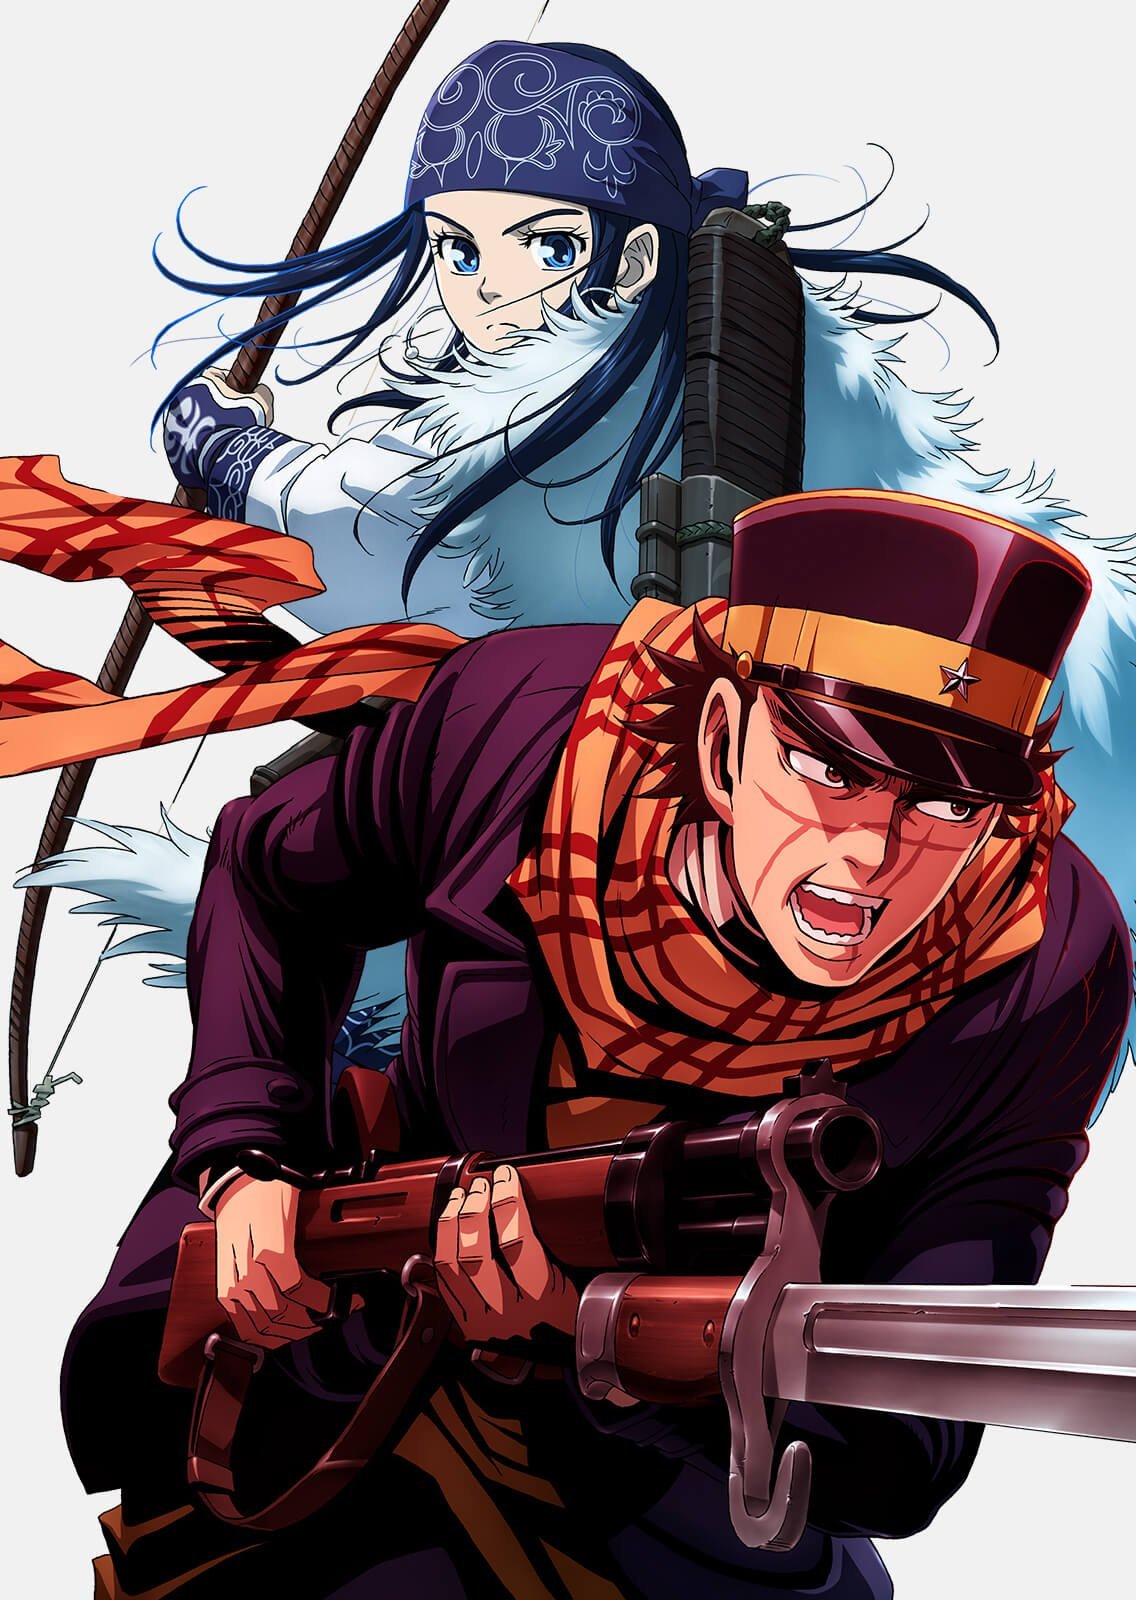 Golden Kamuy Wallpaper High Quality